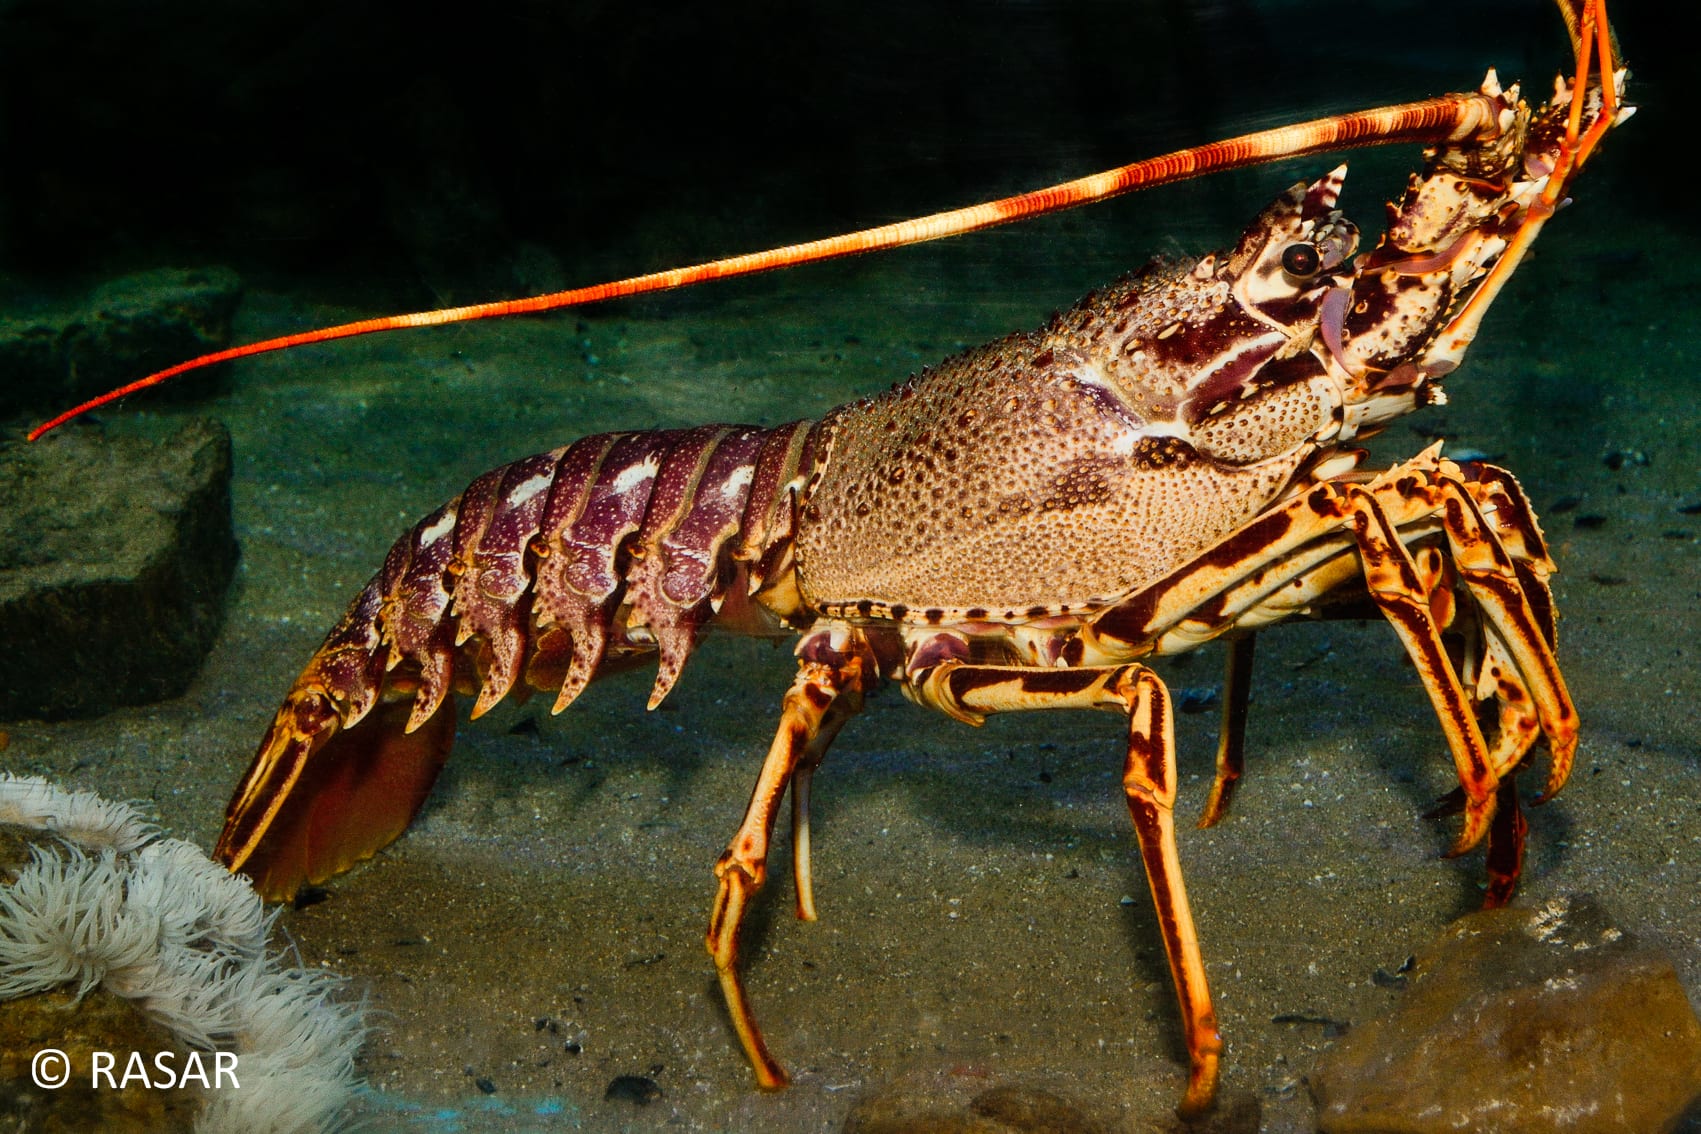 Creating New Opportunities for Spiny Lobster Aquaculture